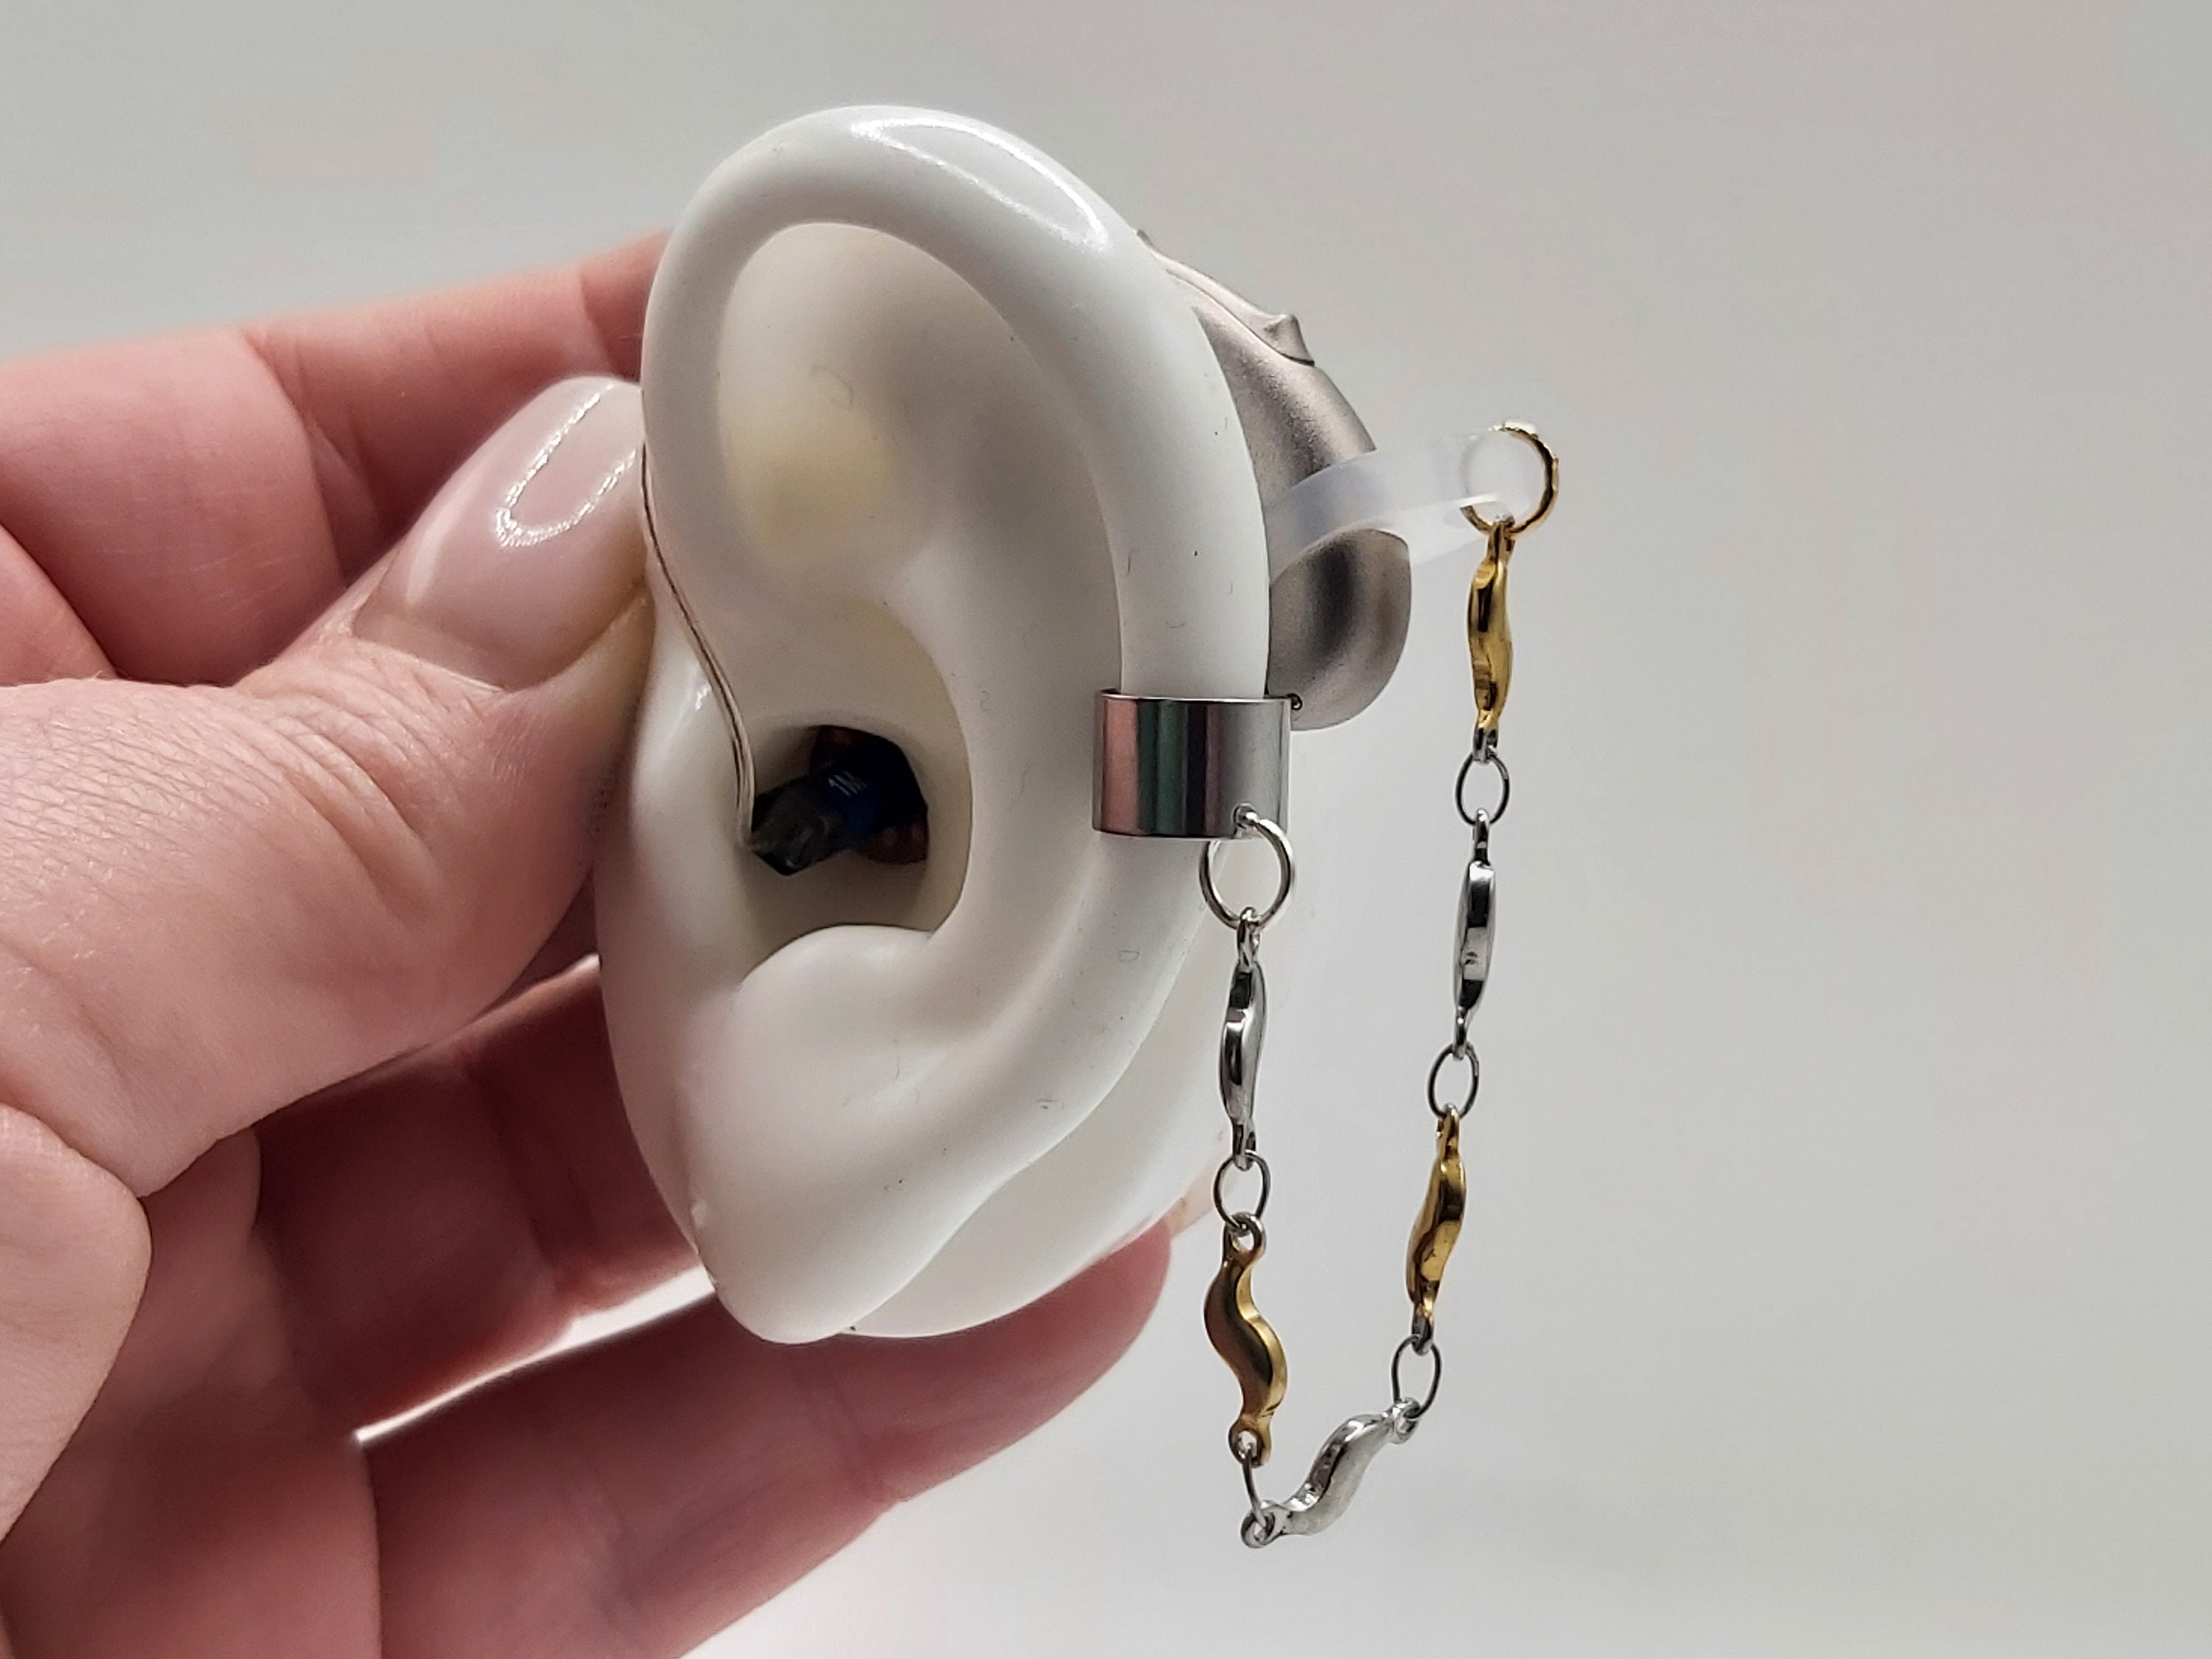 Hearing aid jewelry - Deafmeal makes stylish safety rings and holsters